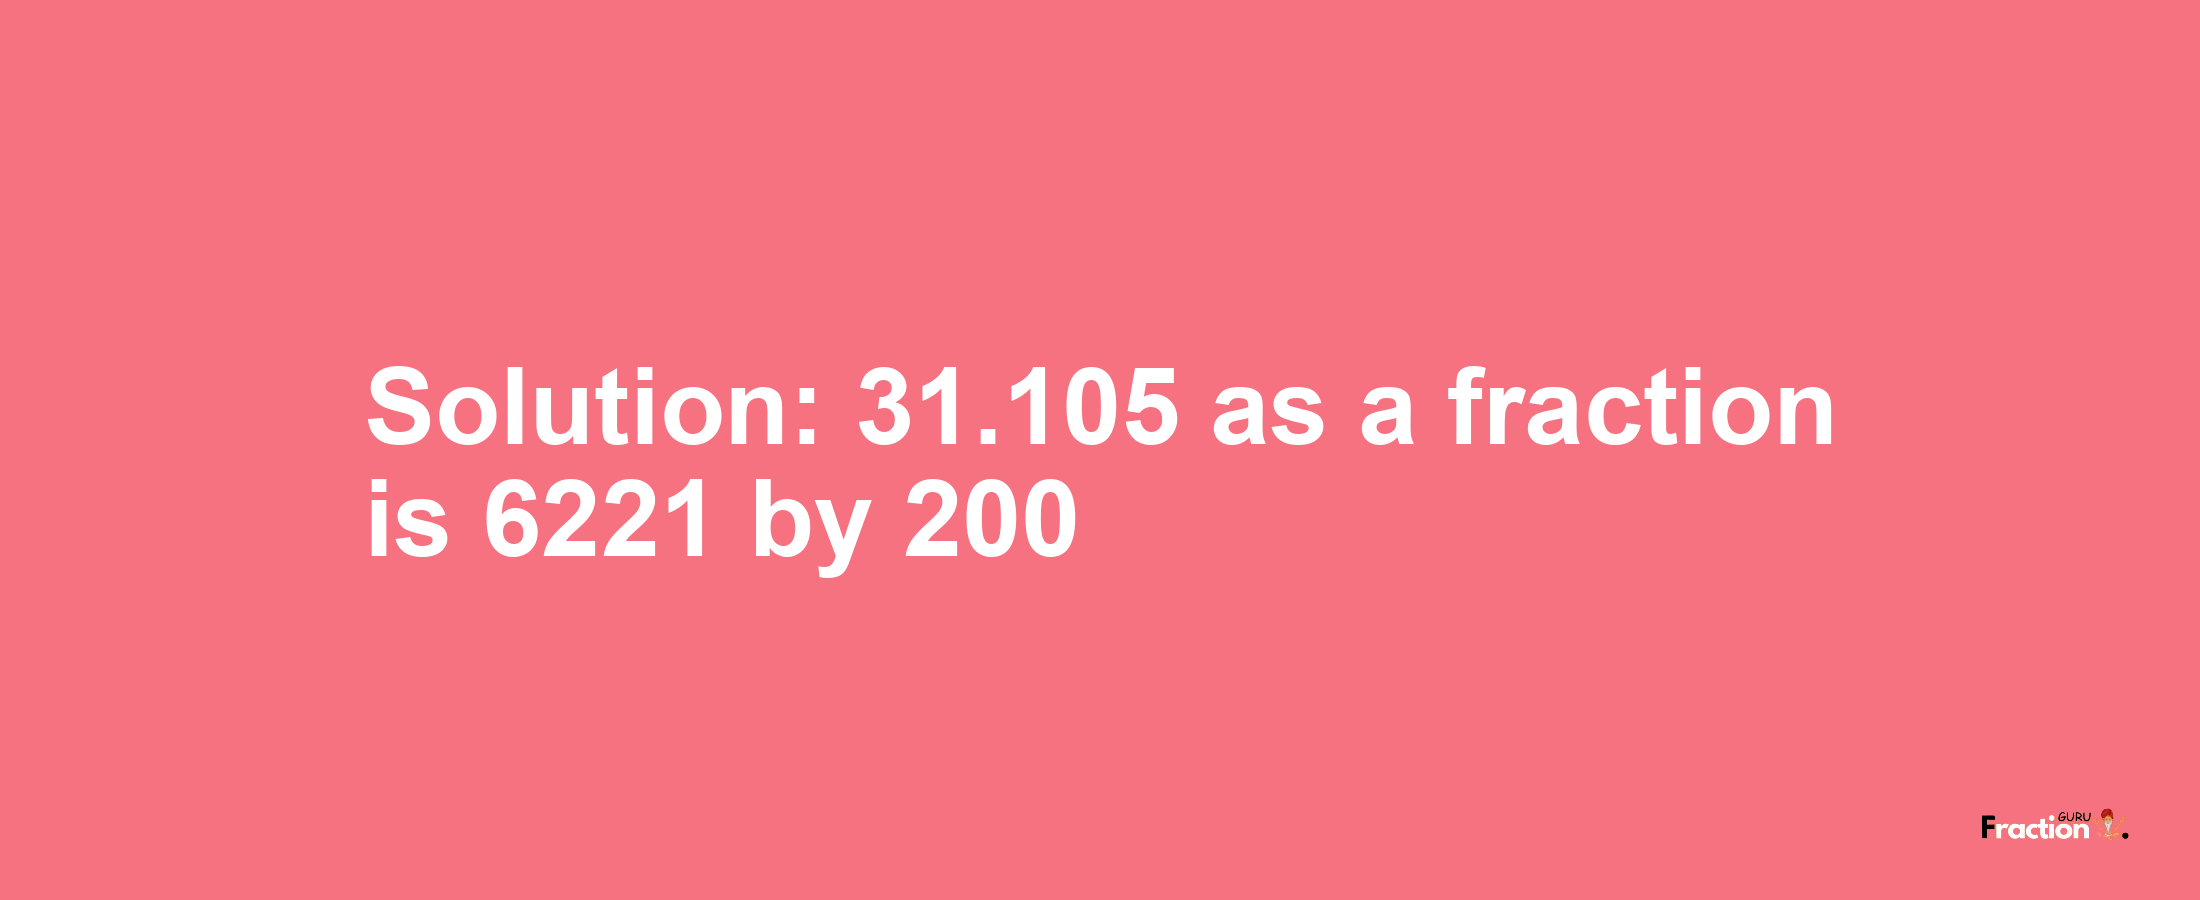 Solution:31.105 as a fraction is 6221/200